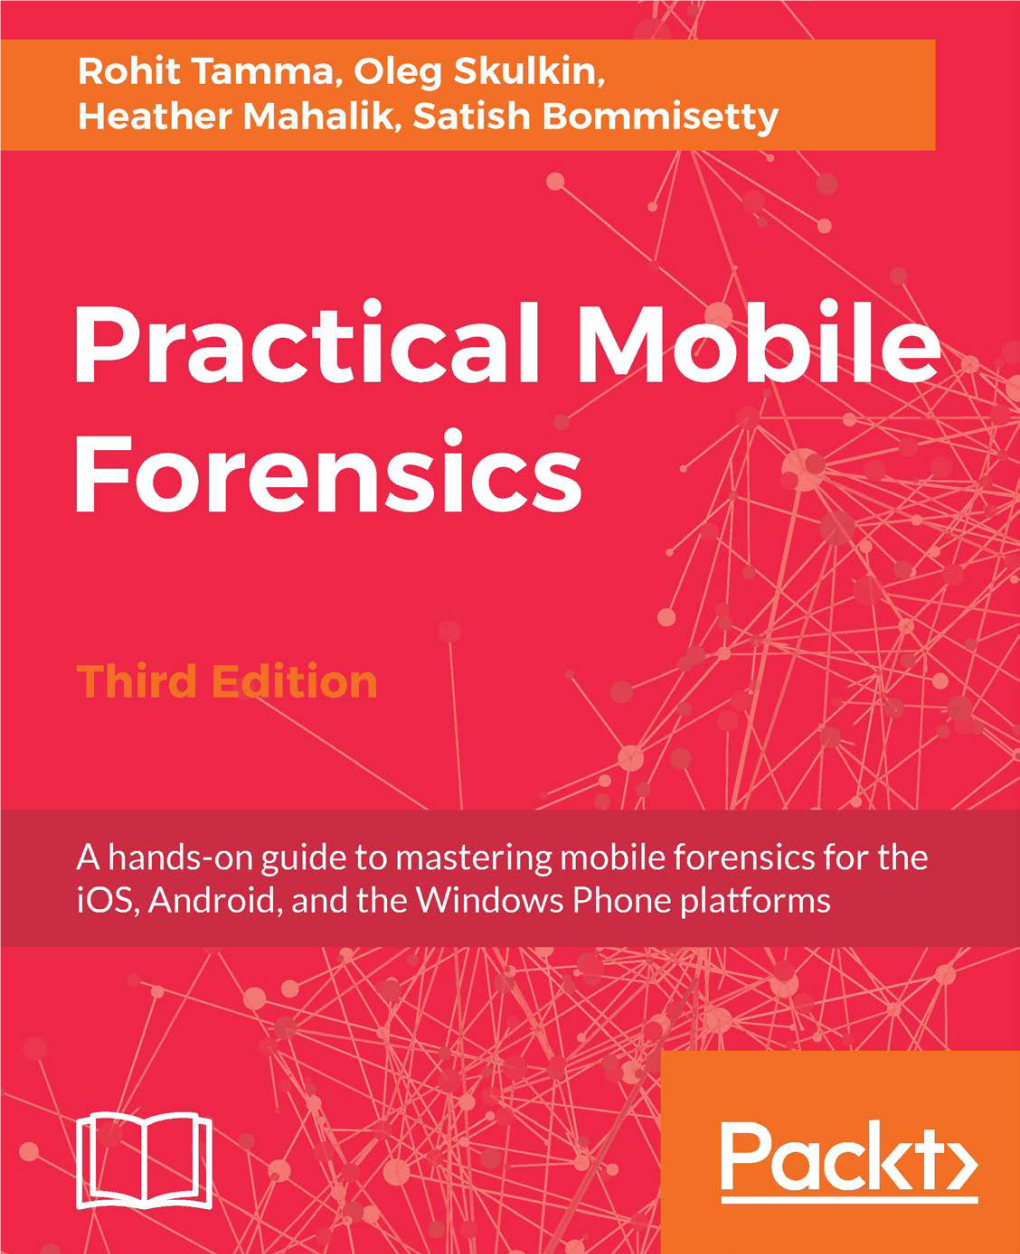 Practical Mobile Forensics Third Edition